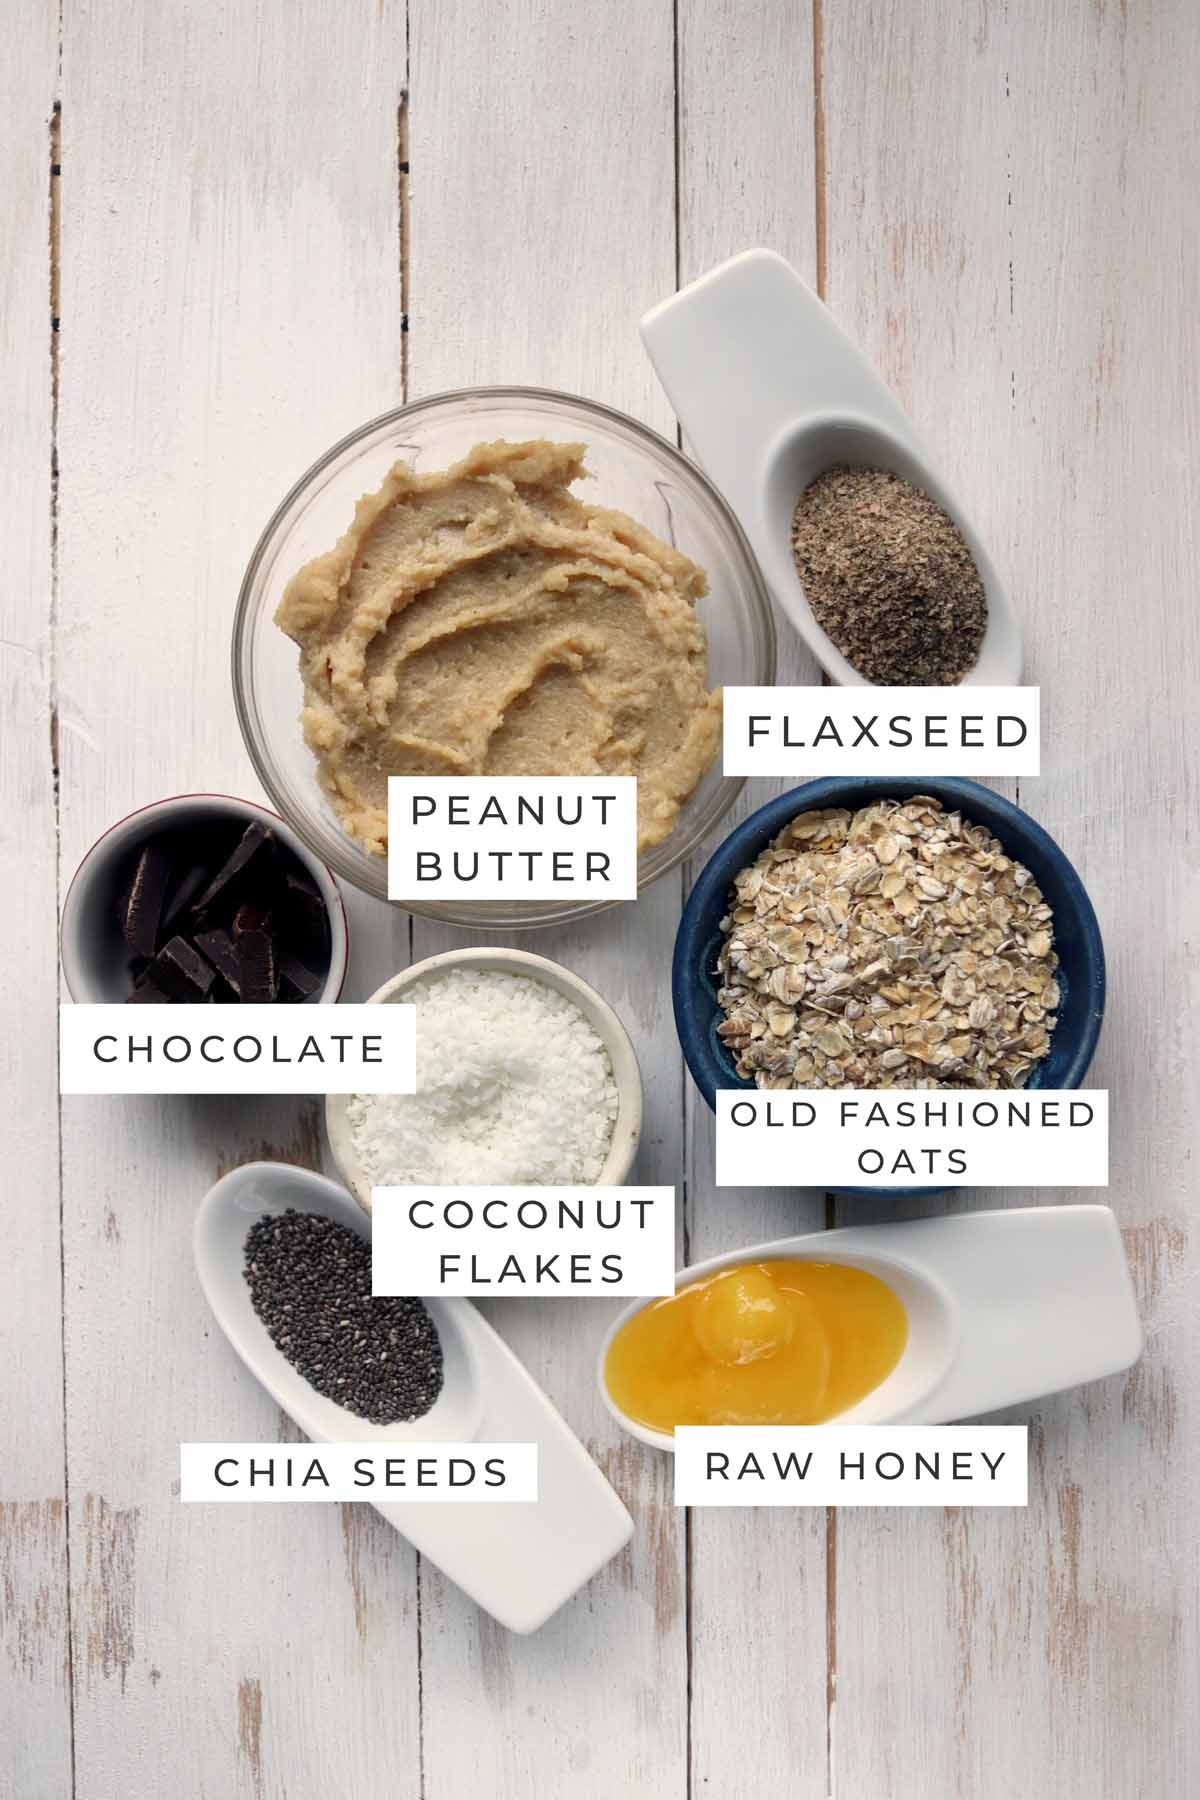 Labeled ingredients for the oatmeal bites.